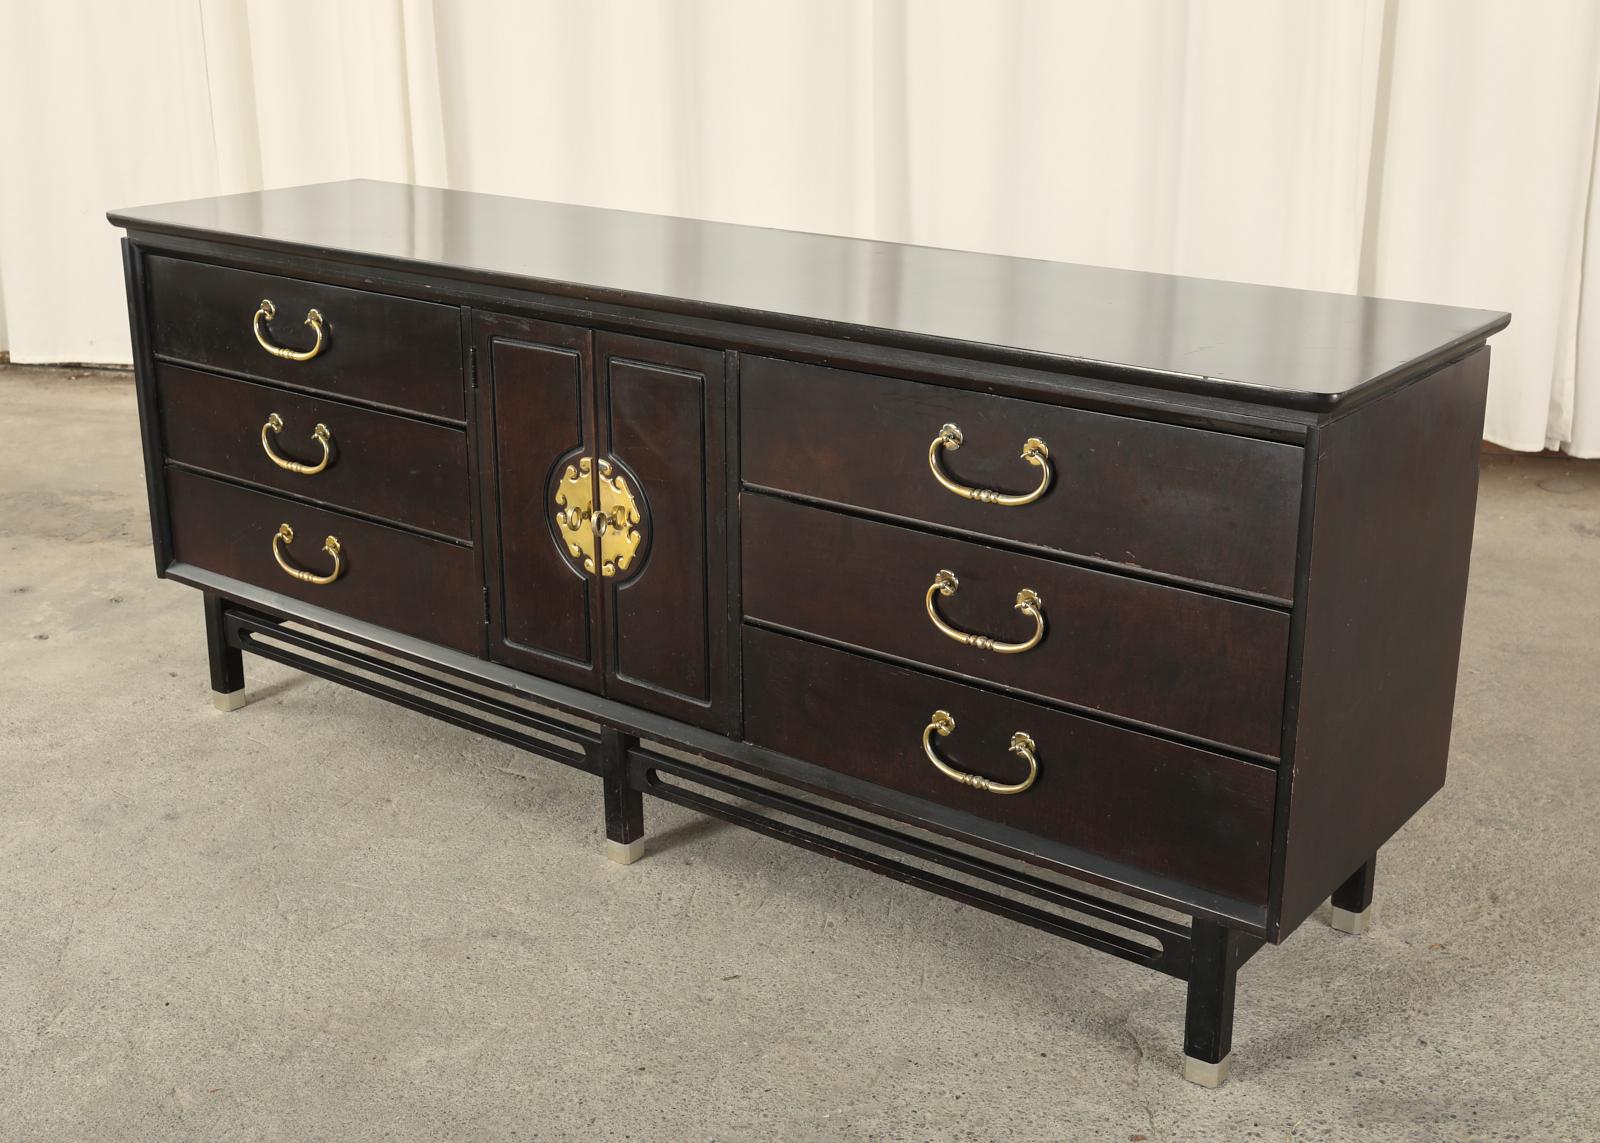 Dramatic Hollywood Regency dresser or credenza featuring a near ebony lacquer finish. Designed in the mid-century chinoiserie Asian inspired taste. Made in the manner and style of James Mont. The case has six large storage drawers with brass